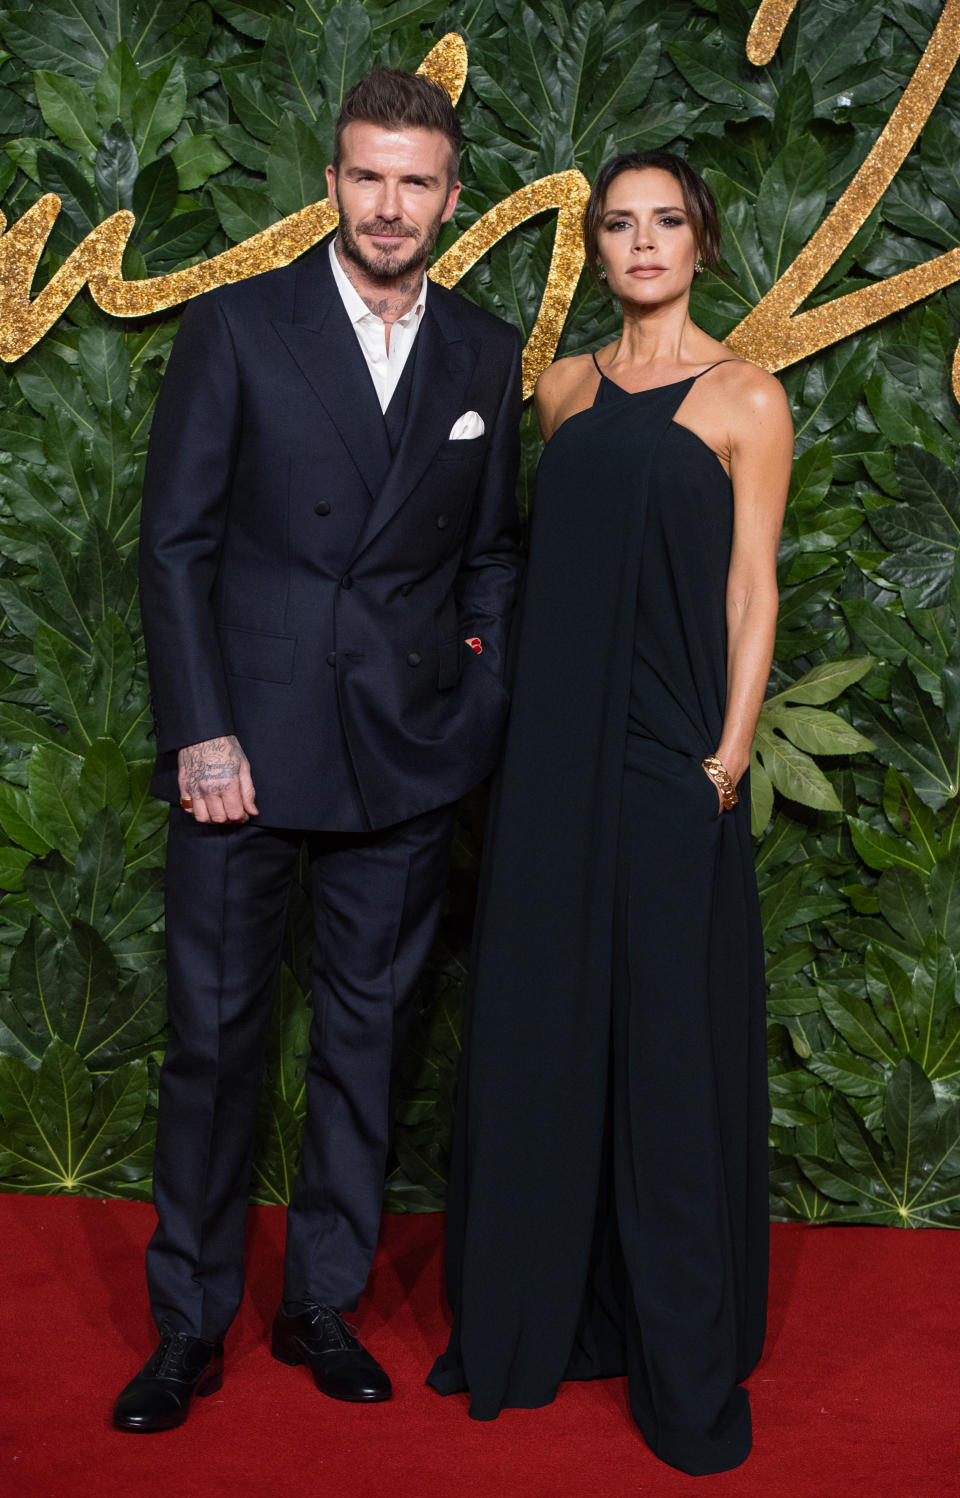 David and Victoria at The Fashion Awards in 2018